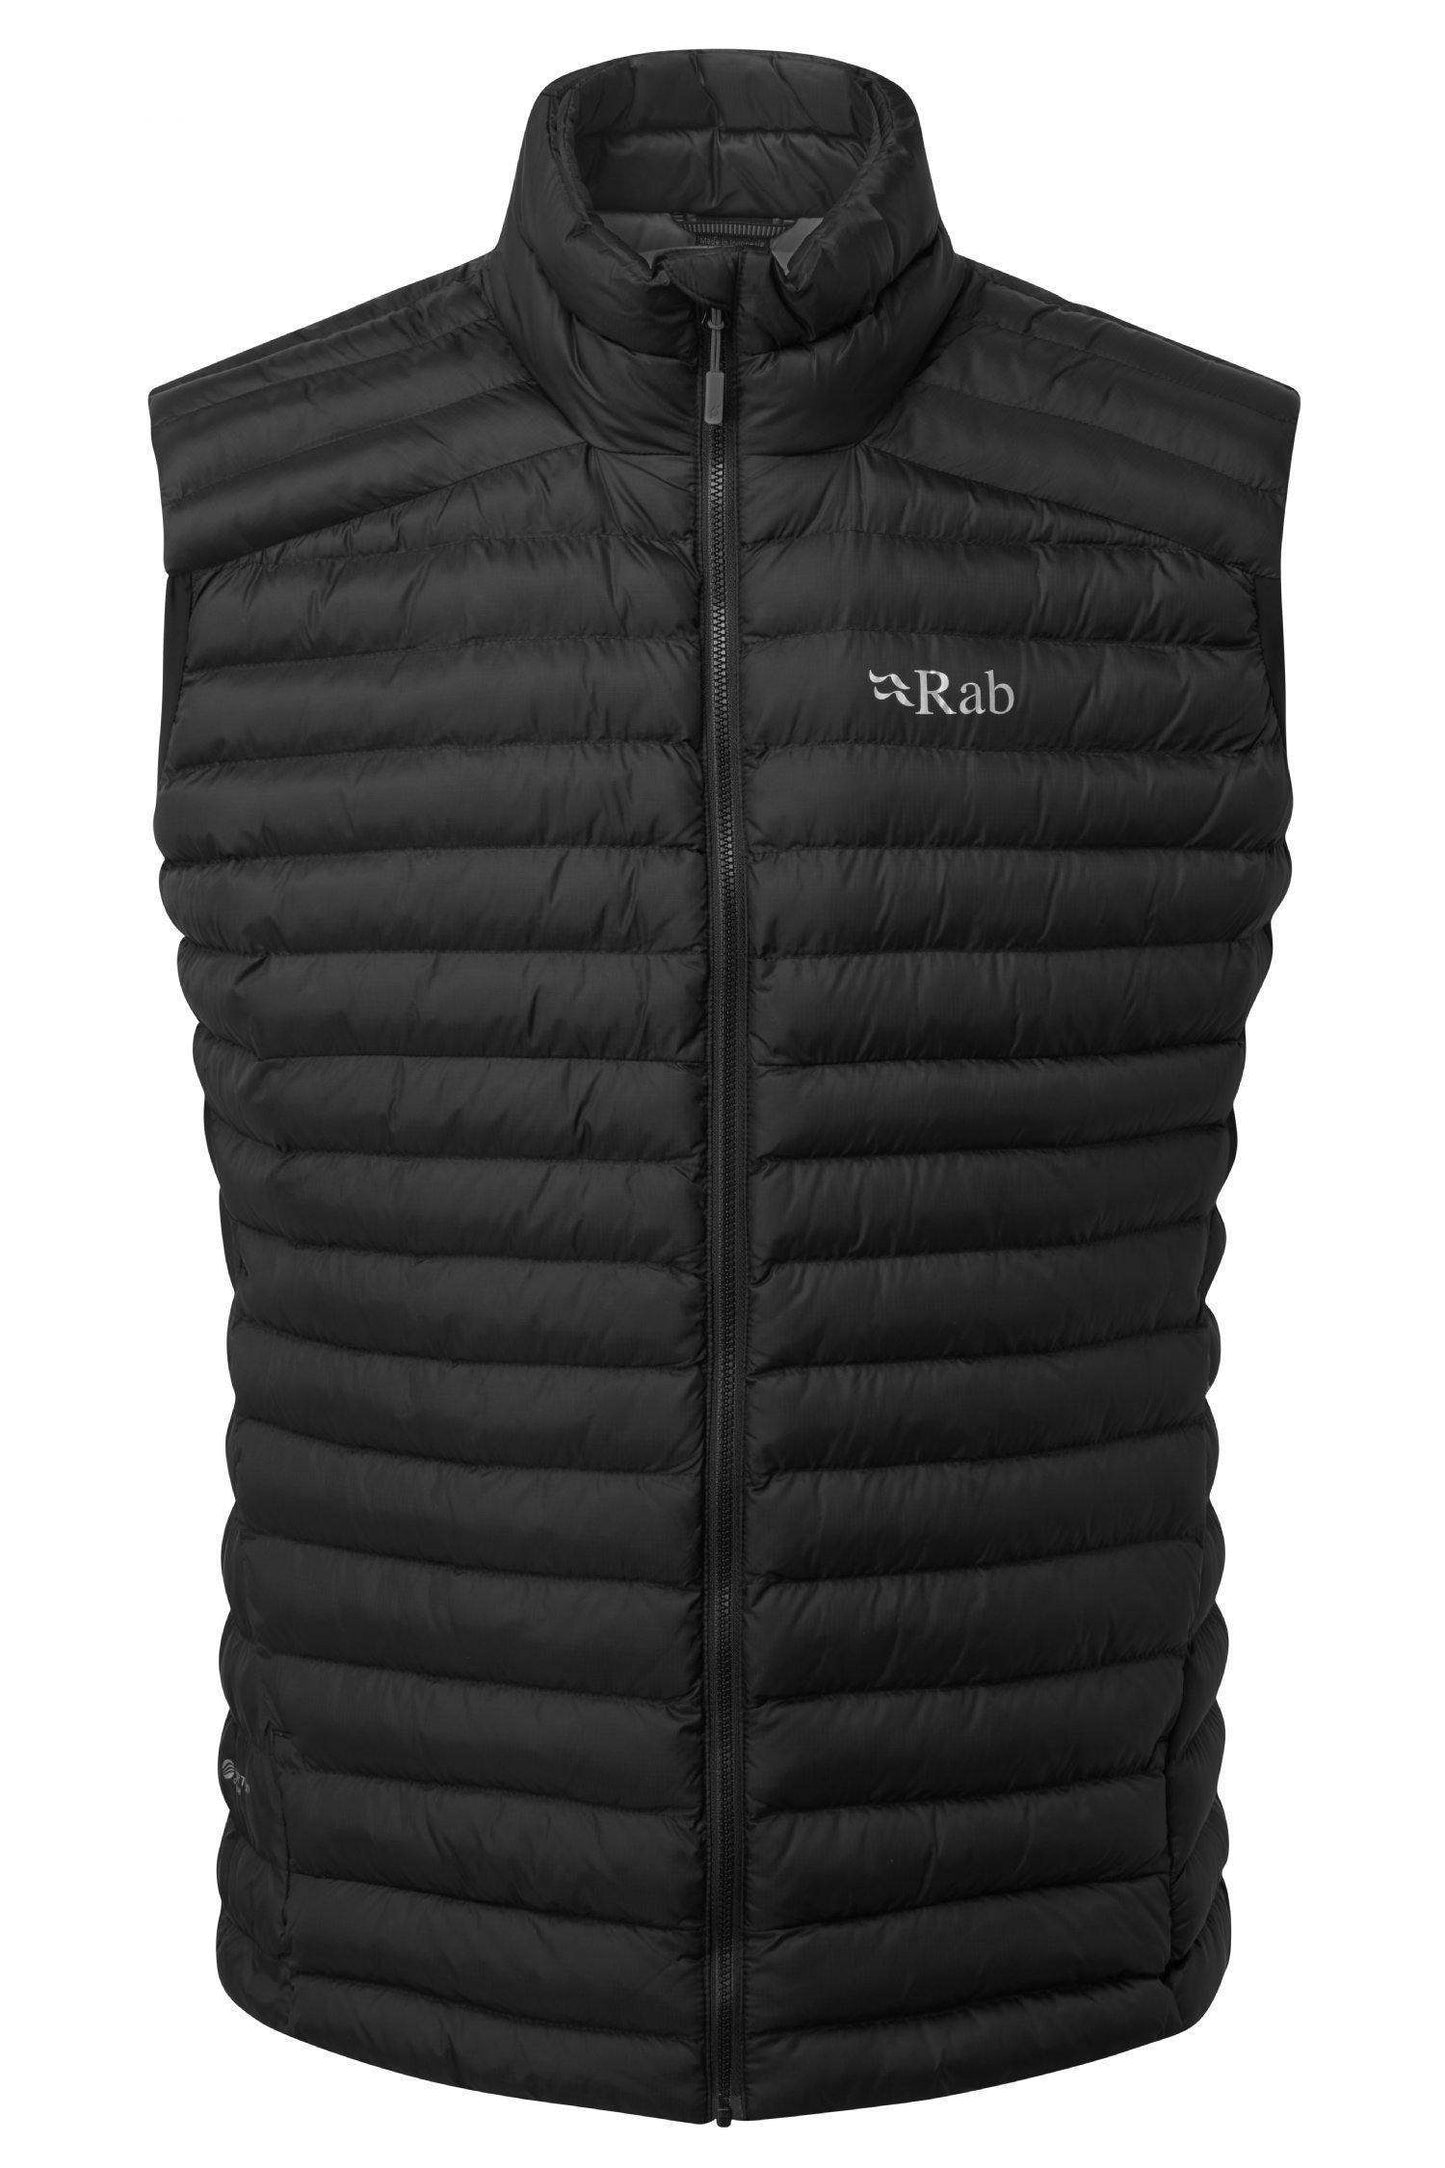 Rab Men's Cirrus Vest - The Luxury Promotional Gifts Company Limited